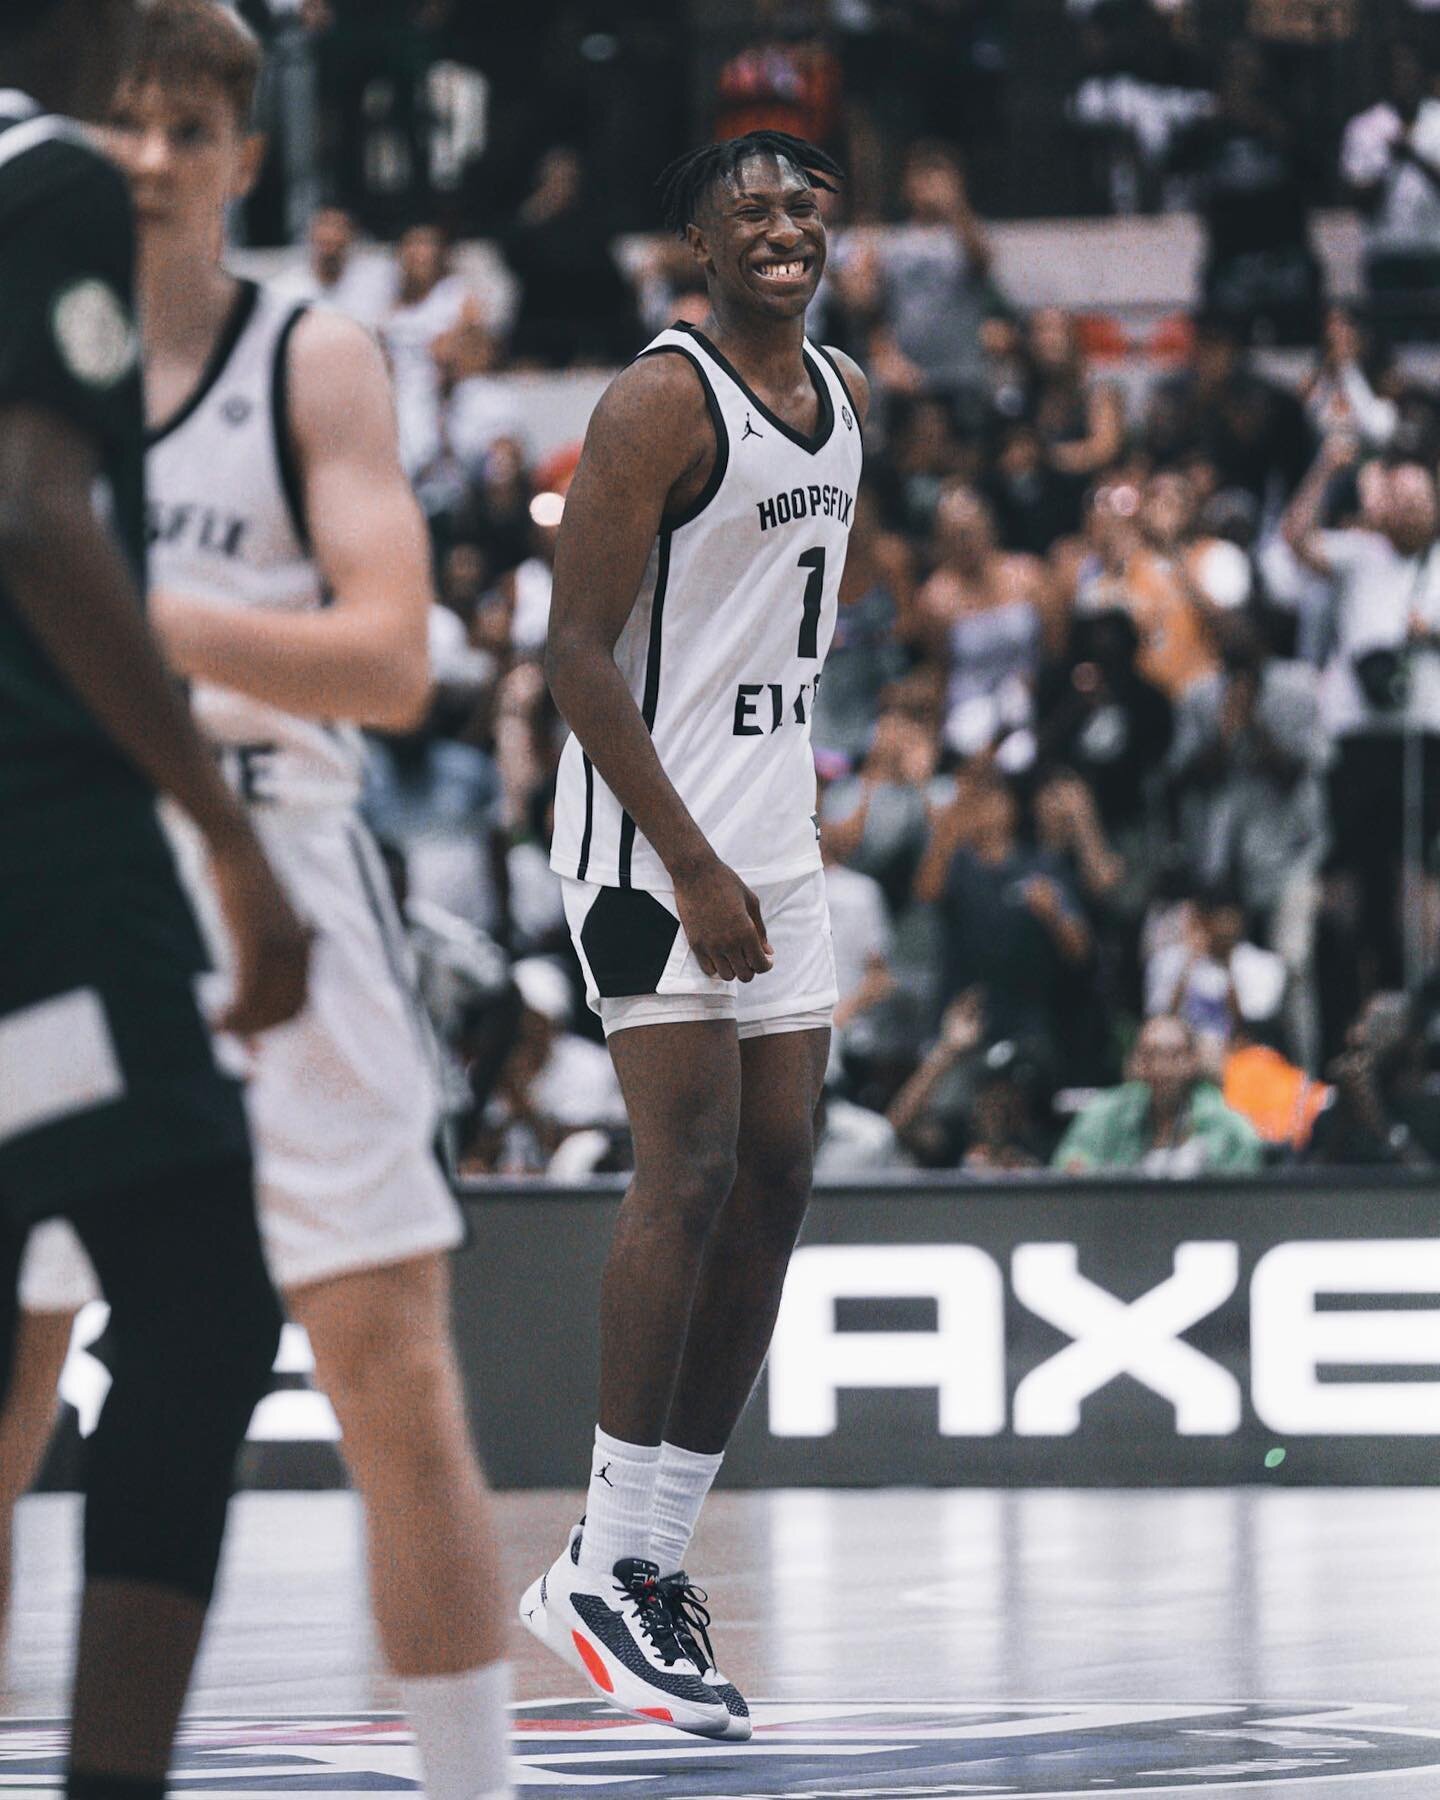 That feeling when you beat one of the best high school teams in the world in front of a sold out crowd at home 🏀🇬🇧

#britishbasketball #hoopsfix #hoopsfixelite #london #hoopersofinstagram #ballislife #hoopdreams #basketballengland #highteahoops